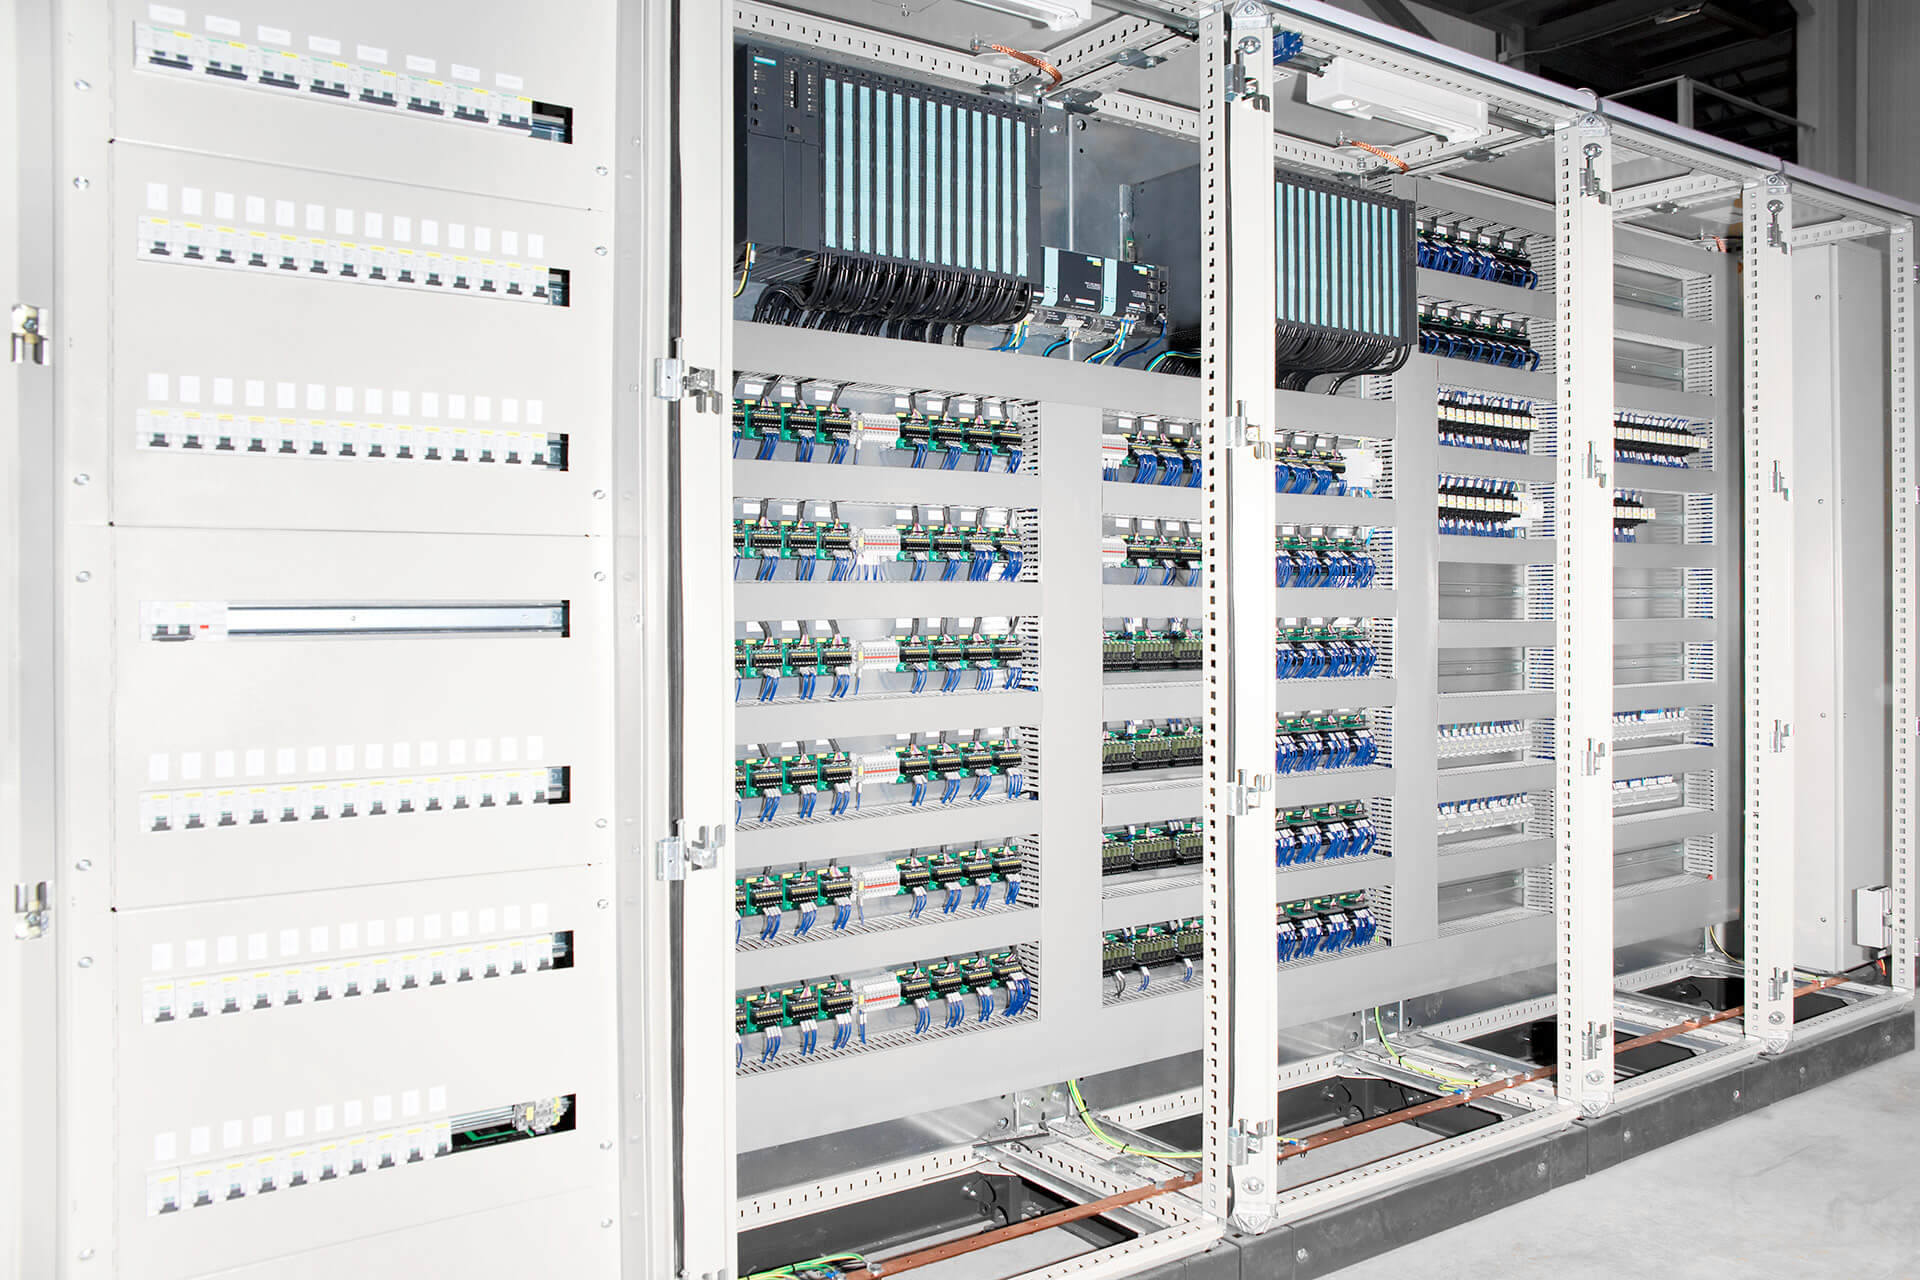 Electrical panels in hospitals are devices that concentrate and distribute electrical energy from the main electrical network to different areas of an hospital facilities